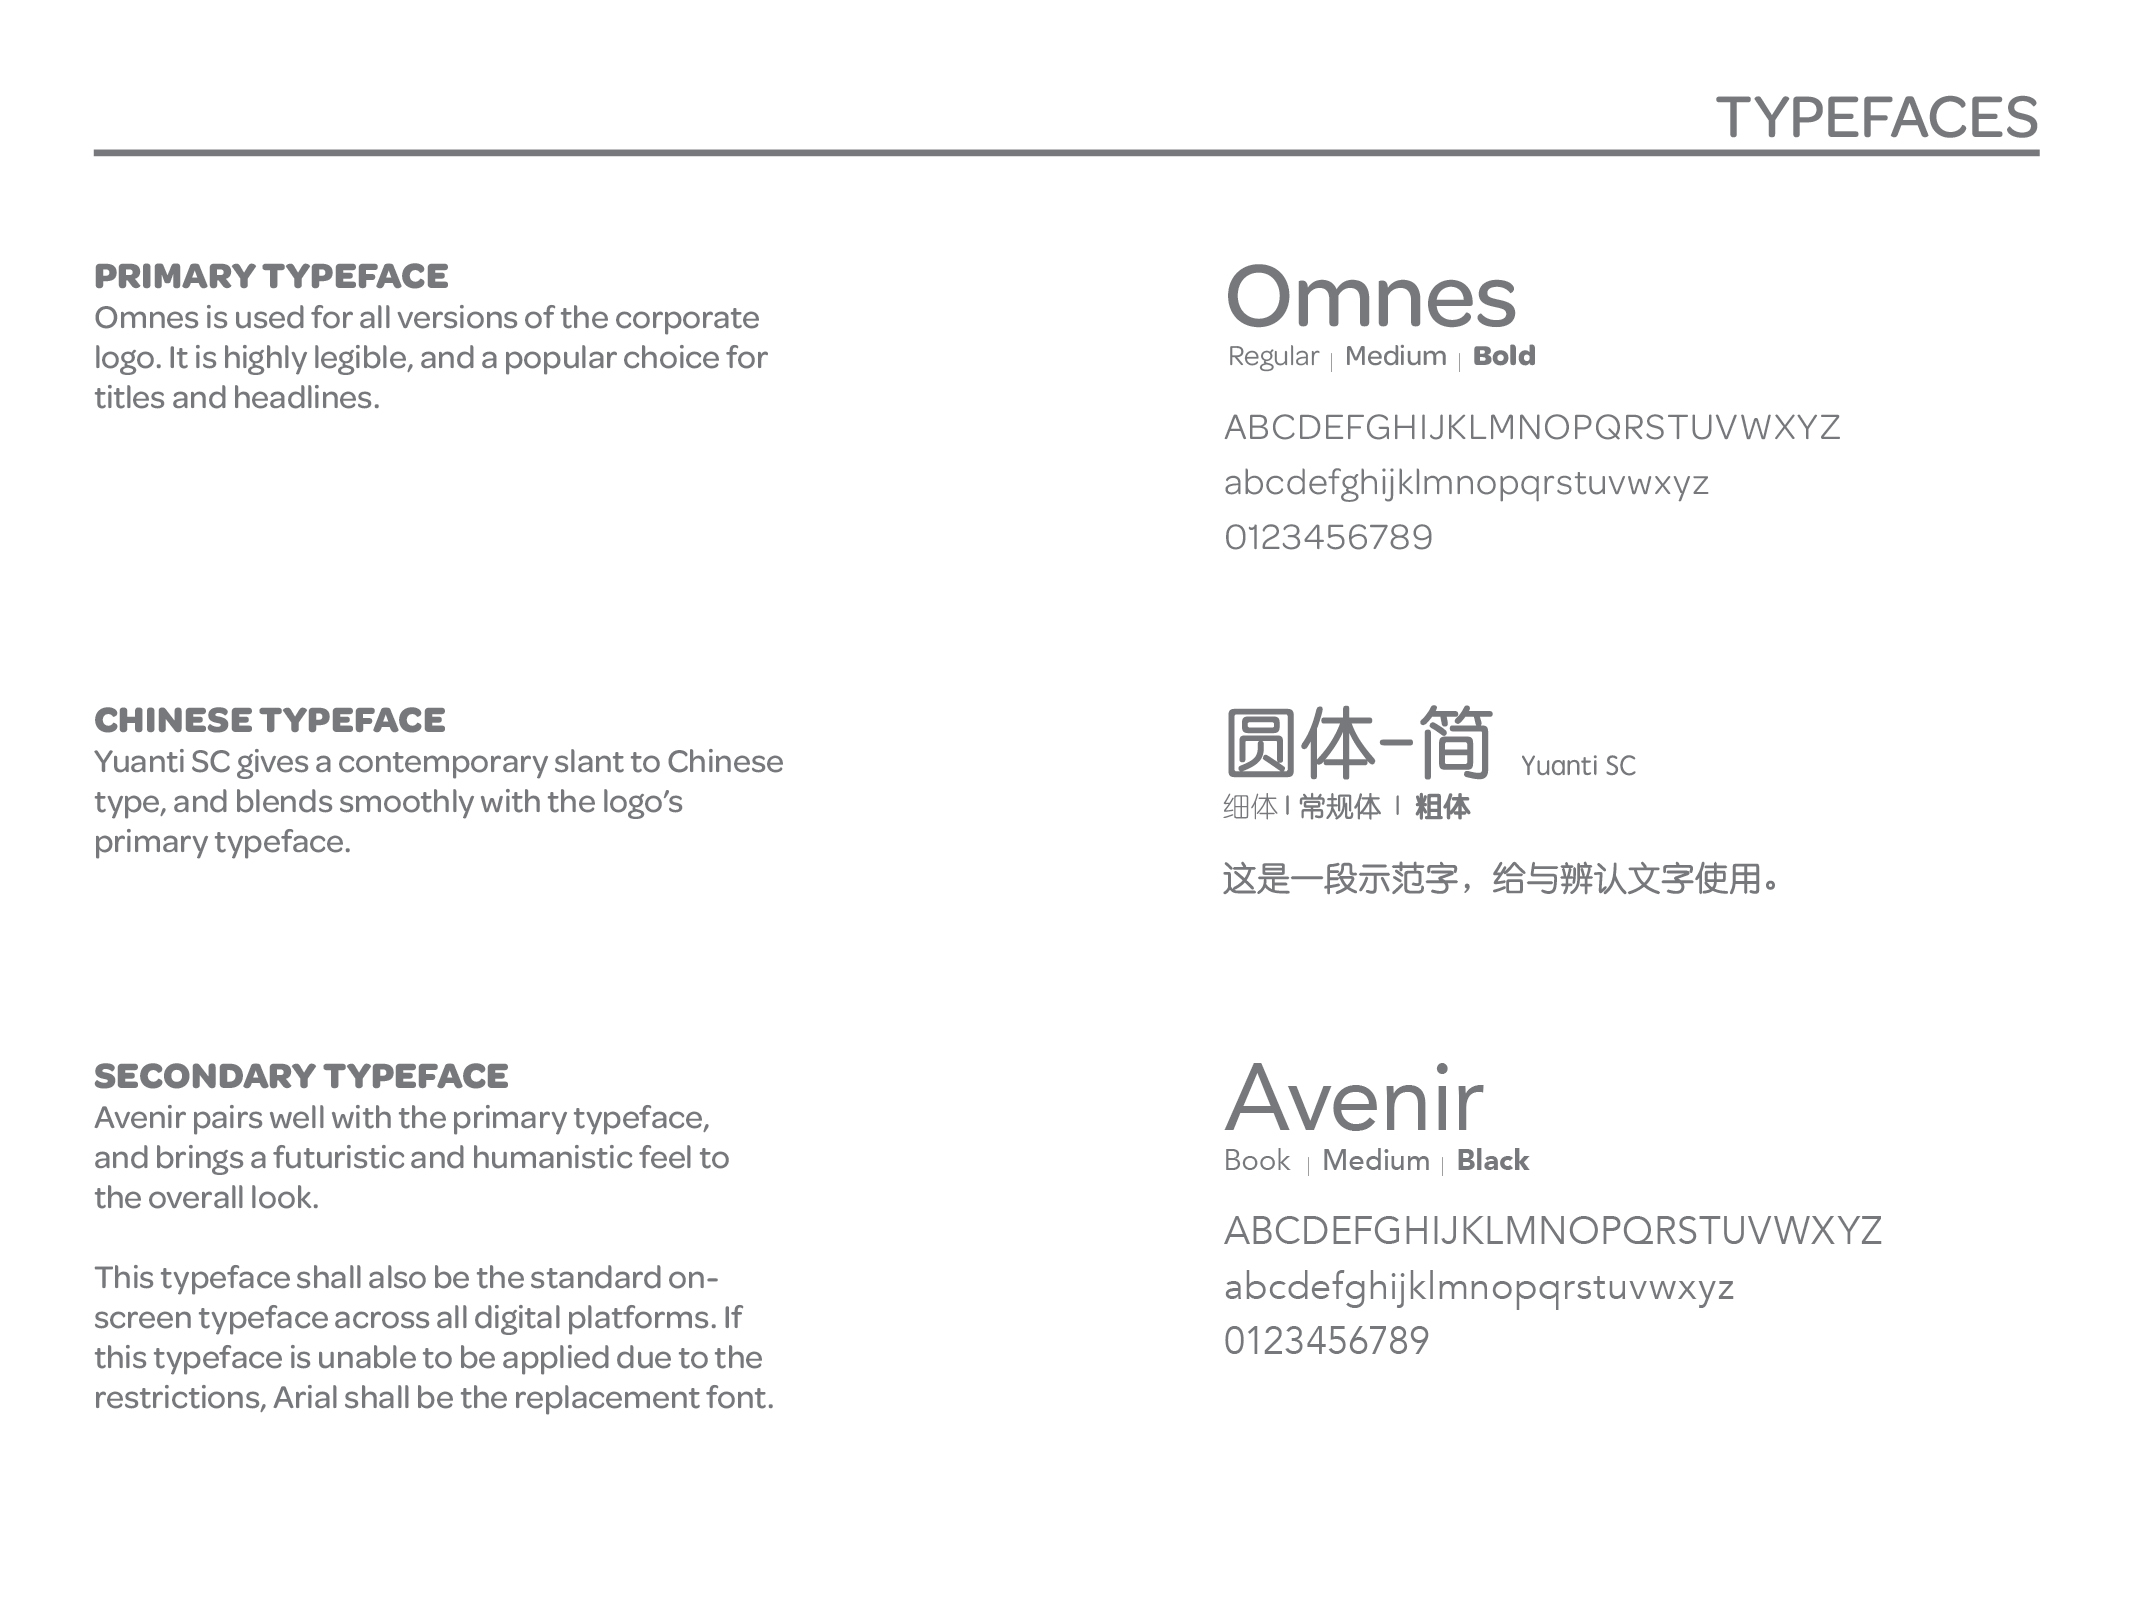 06_Fatty Weng_project visuals_Typefaces.jpg